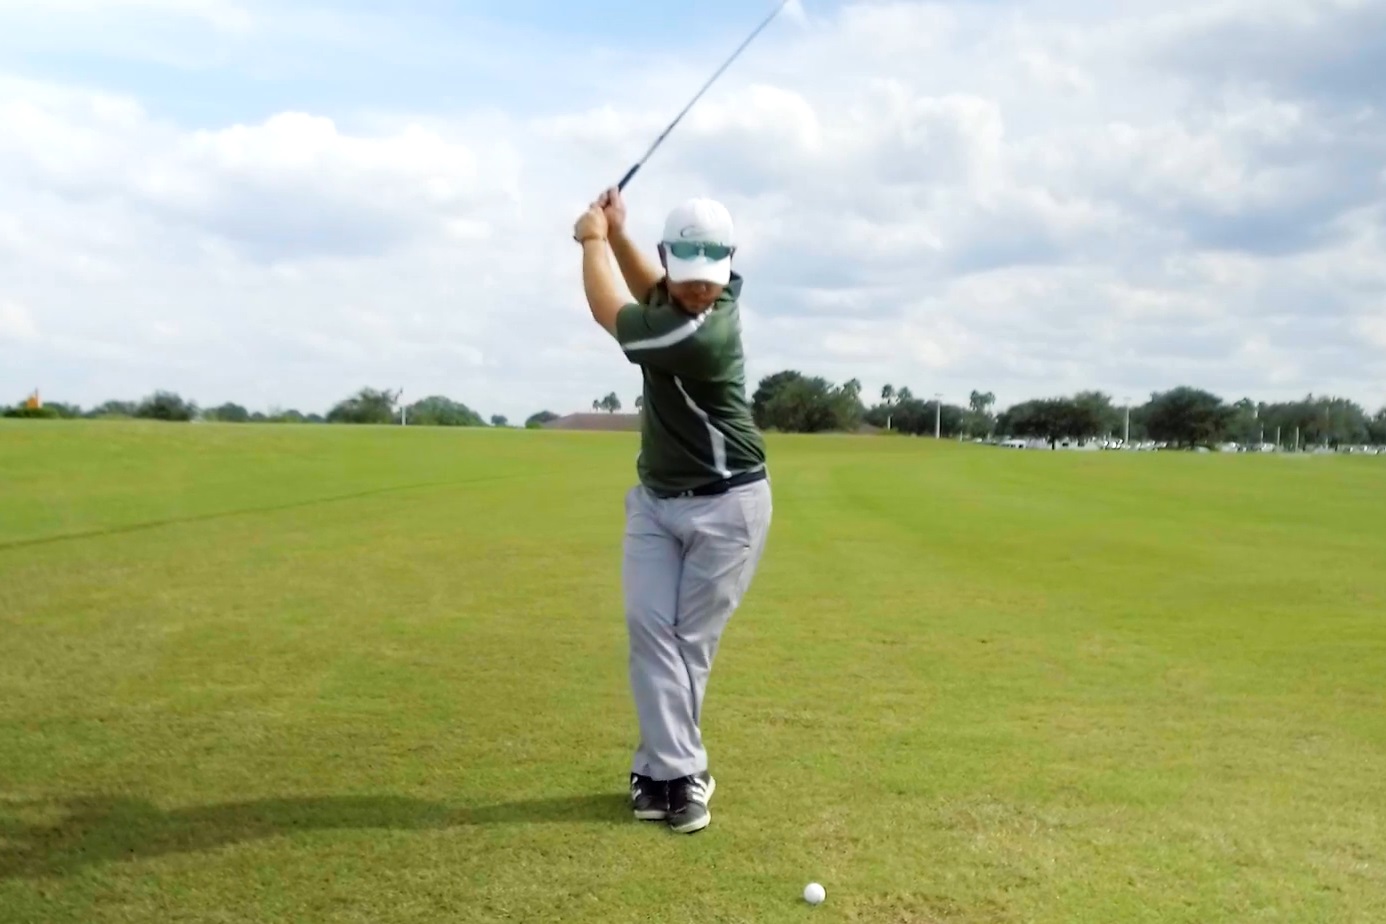 The Most Important Part of the Golf Swing is in the First Foot